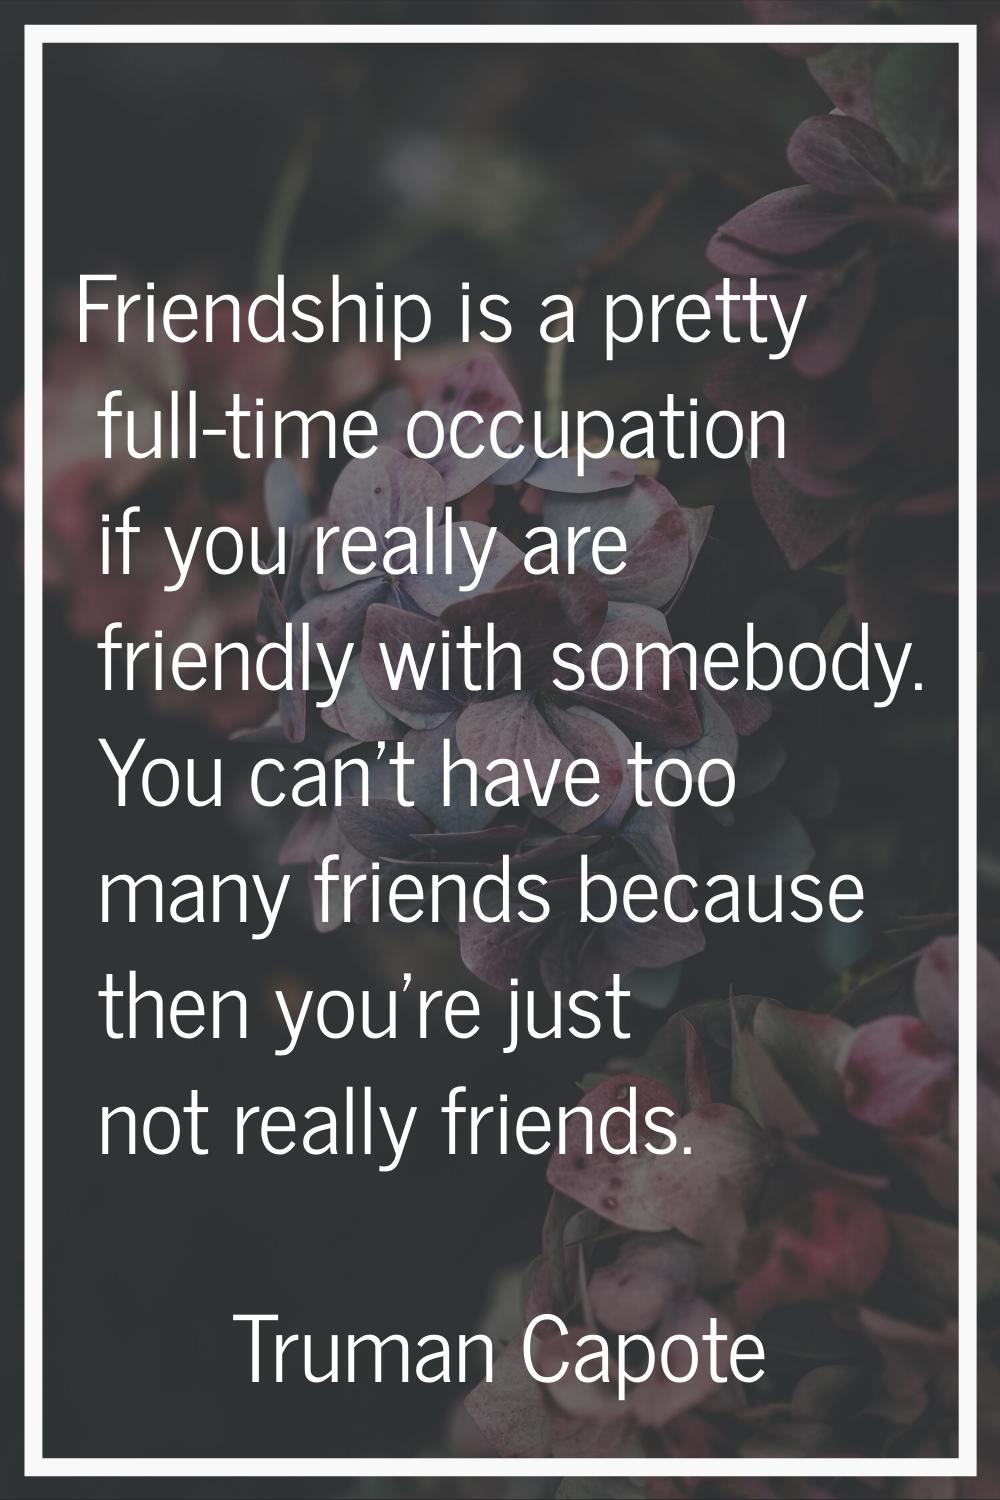 Friendship is a pretty full-time occupation if you really are friendly with somebody. You can't hav